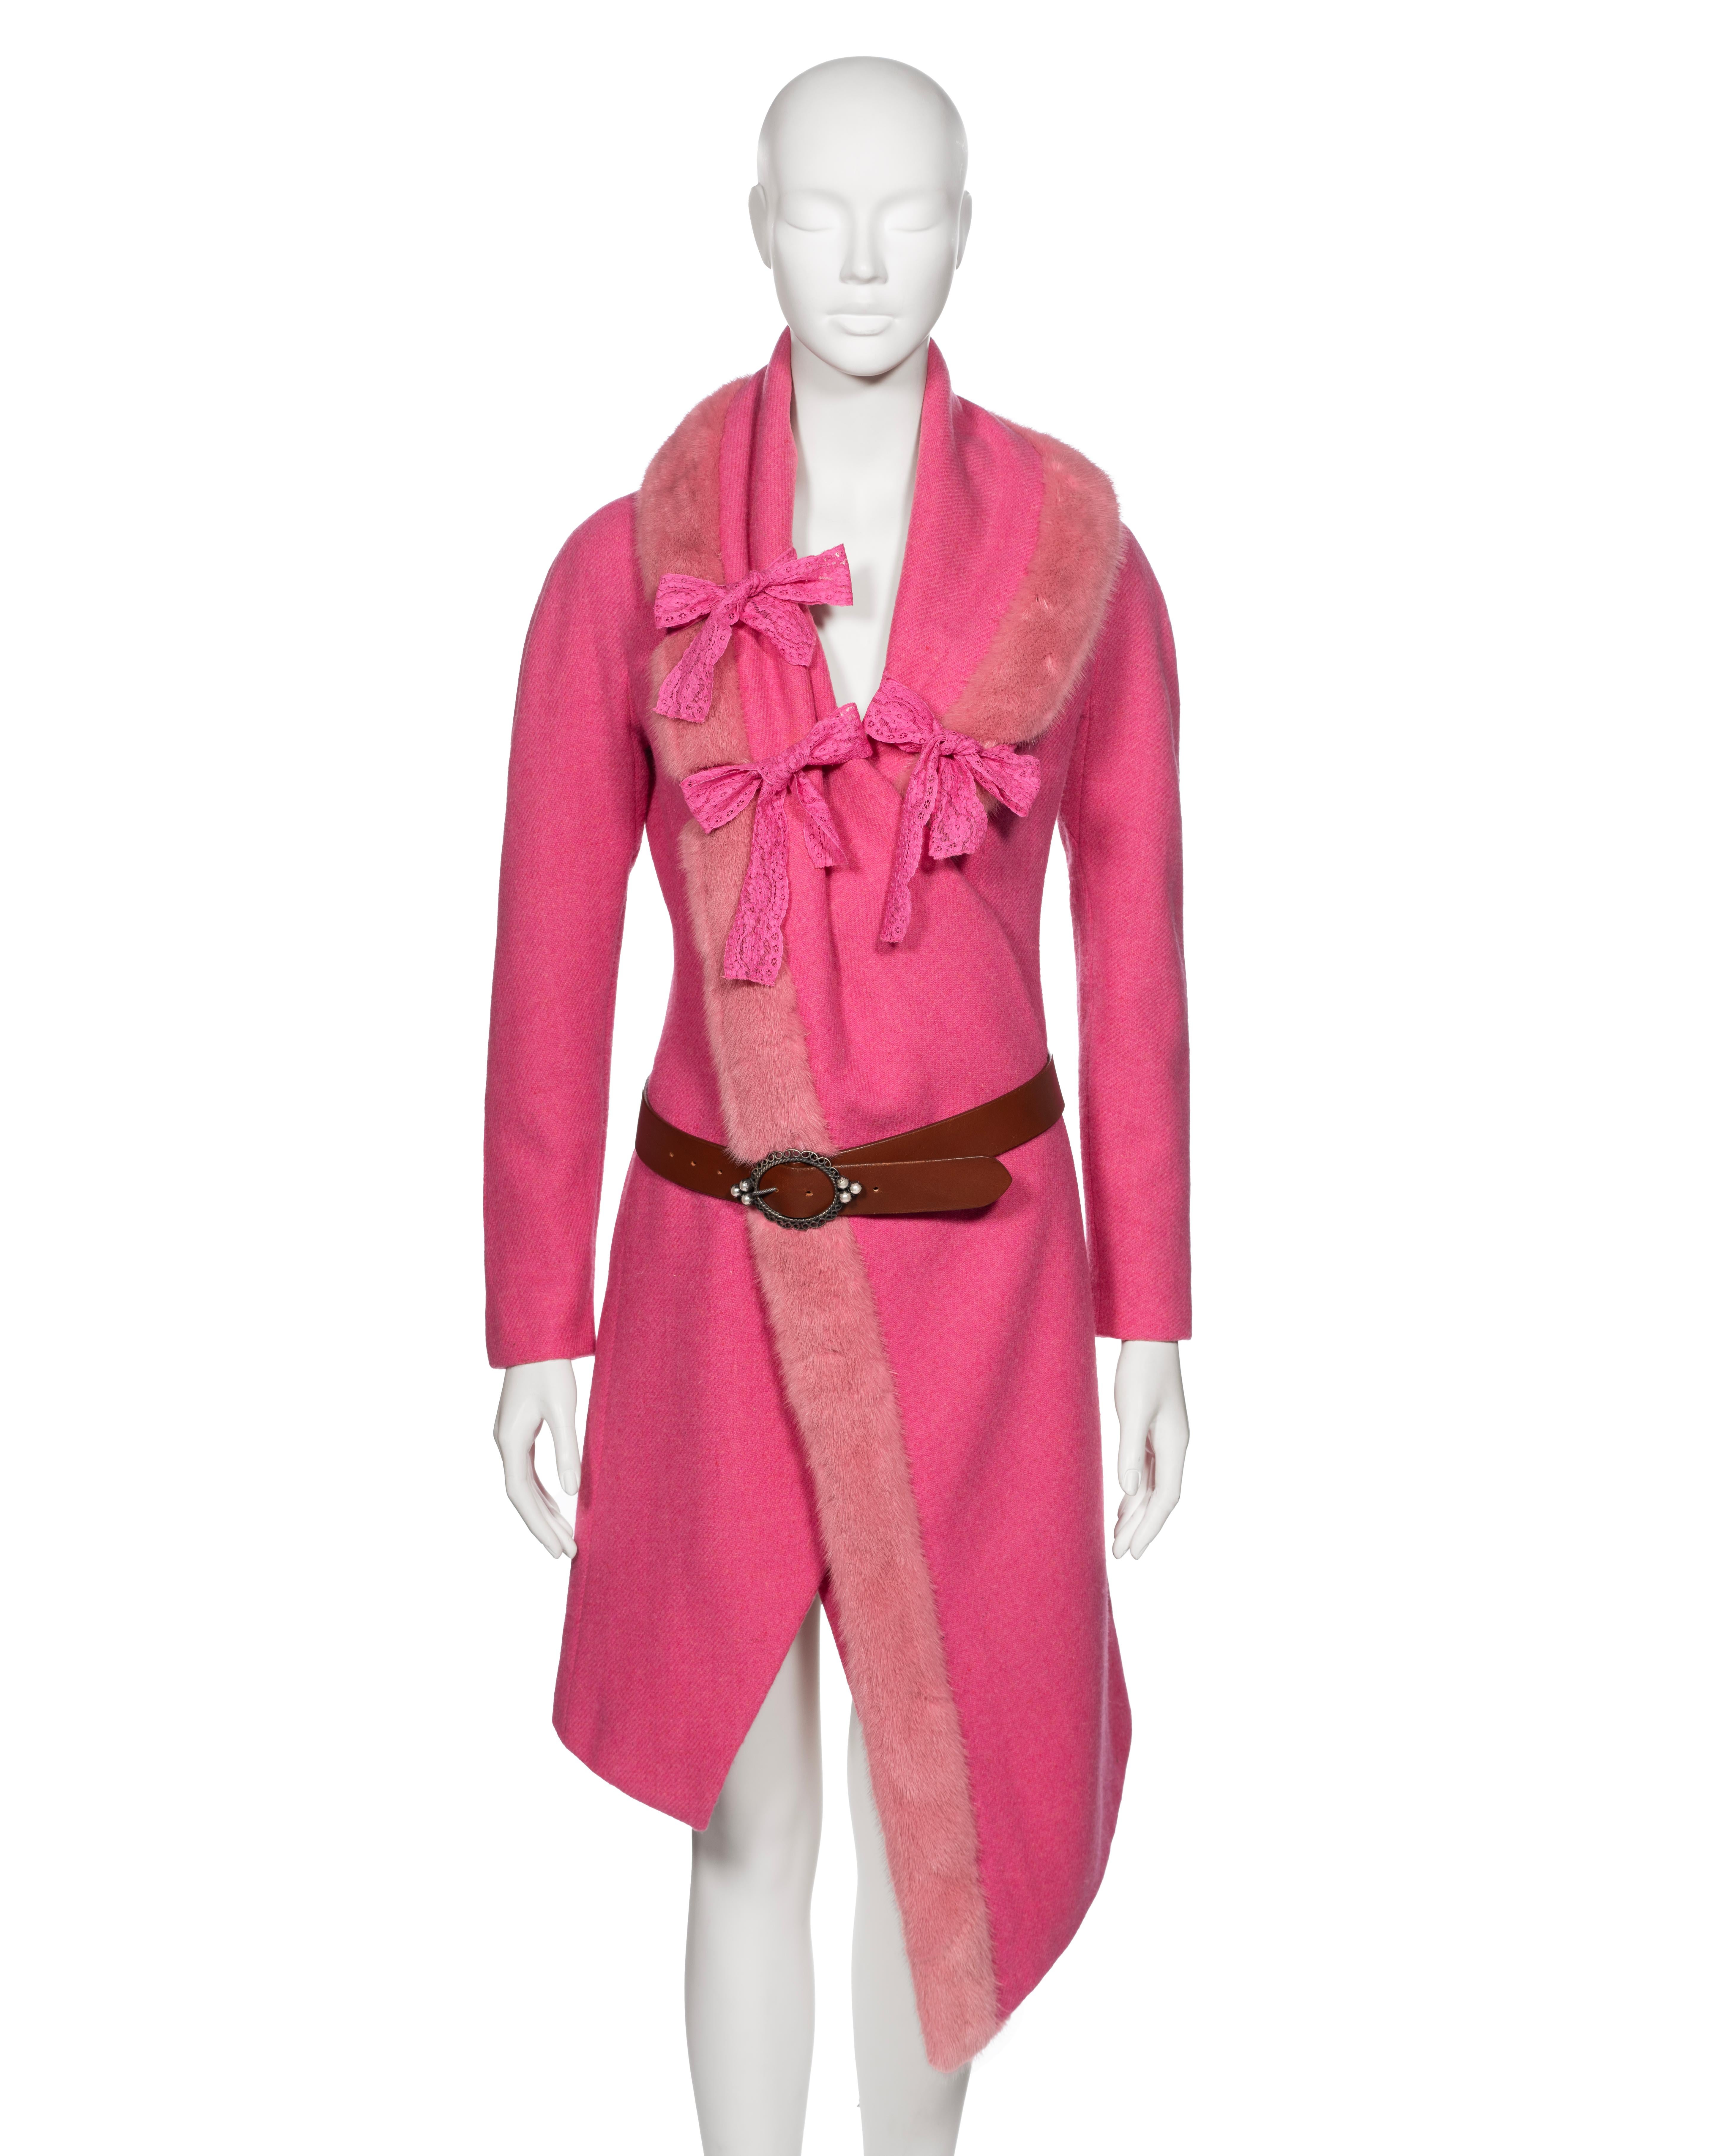 ▪ Archival Christian Dior Runway Coat
▪ Creative Director: John Galliano
▪ Fall-Winter 1998
▪ Crafted from exquisite pink wool tweed
▪ Boasts an asymmetric large shawl lapel cascading to the hemline, trimmed with luscious pink dyed mink fur
▪